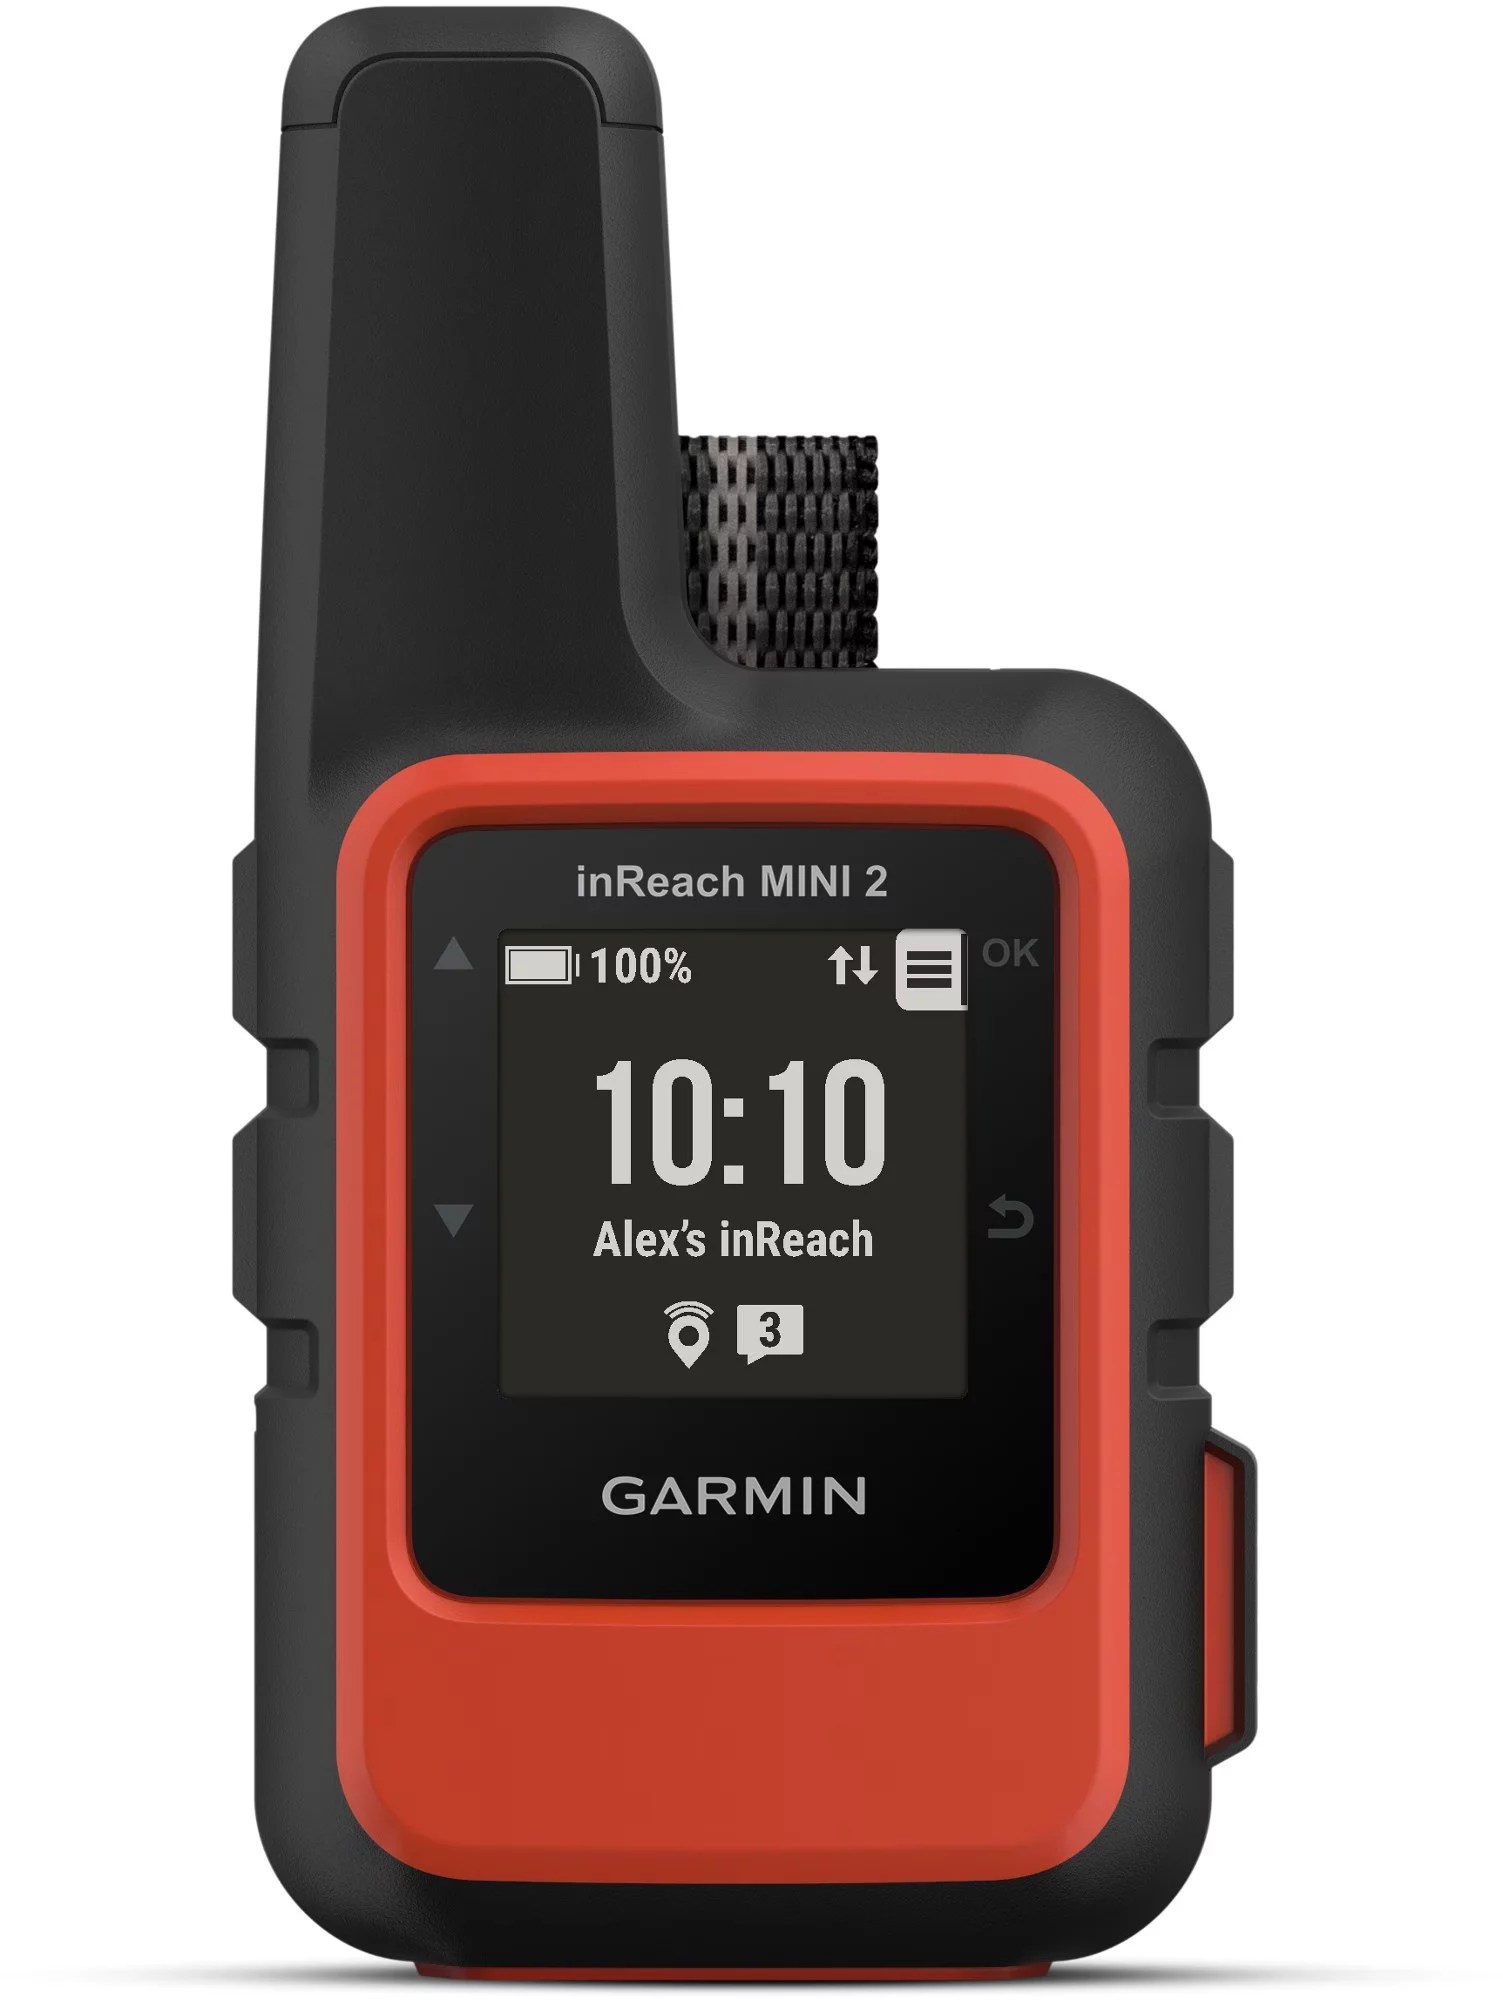 garmin mini inreach satellite, one of the best things you can buy from REI